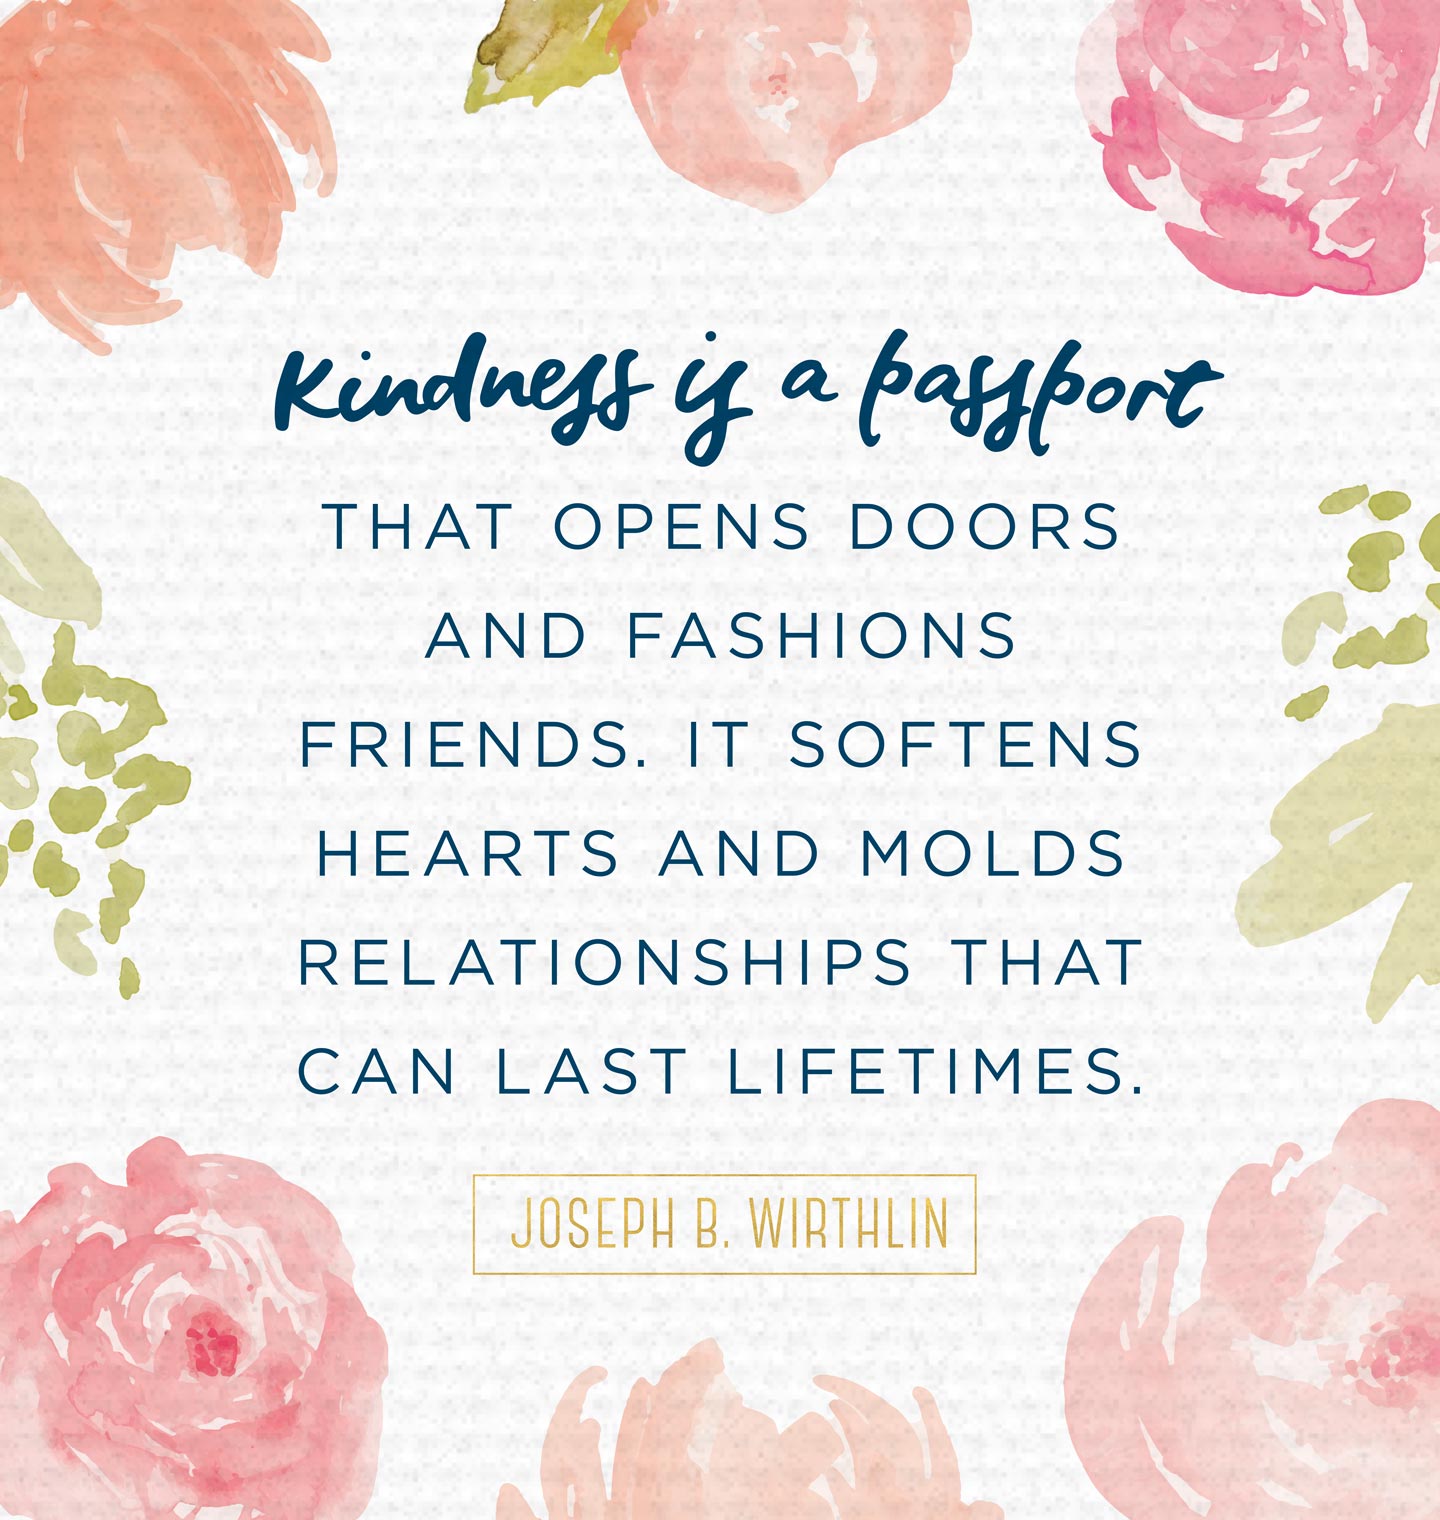 kindness is a passport that opens door and fashions friends. it softens hearts and molds relationships that can last lifetimes. joseph b. wirthlin